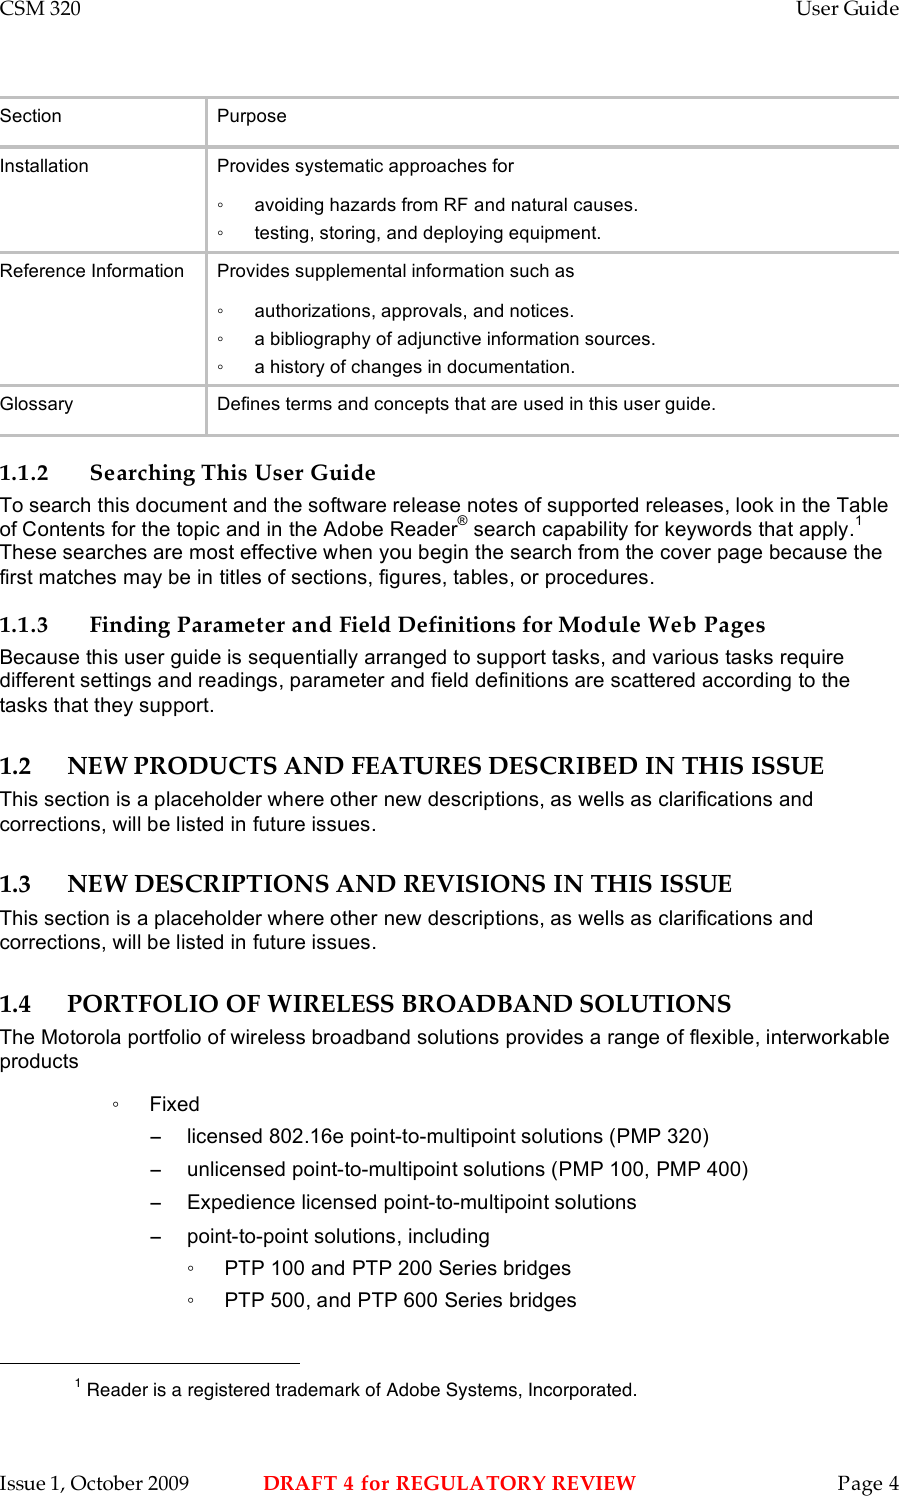 CSM 320    User Guide    Issue 1, October 2009  DRAFT 4 for REGULATORY REVIEW  Page 4 Section Purpose Installation Provides systematic approaches for ◦  avoiding hazards from RF and natural causes. ◦  testing, storing, and deploying equipment. Reference Information Provides supplemental information such as ◦  authorizations, approvals, and notices. ◦  a bibliography of adjunctive information sources. ◦  a history of changes in documentation. Glossary Defines terms and concepts that are used in this user guide. 1.1.2 Searching This User Guide To search this document and the software release notes of supported releases, look in the Table of Contents for the topic and in the Adobe Reader® search capability for keywords that apply.1 These searches are most effective when you begin the search from the cover page because the first matches may be in titles of sections, figures, tables, or procedures. 1.1.3 Finding Parameter and Field Definitions for Module Web Pages Because this user guide is sequentially arranged to support tasks, and various tasks require different settings and readings, parameter and field definitions are scattered according to the tasks that they support. 1.2 NEW PRODUCTS AND FEATURES DESCRIBED IN THIS ISSUE This section is a placeholder where other new descriptions, as wells as clarifications and corrections, will be listed in future issues. 1.3 NEW DESCRIPTIONS AND REVISIONS IN THIS ISSUE This section is a placeholder where other new descriptions, as wells as clarifications and corrections, will be listed in future issues. 1.4 PORTFOLIO OF WIRELESS BROADBAND SOLUTIONS The Motorola portfolio of wireless broadband solutions provides a range of flexible, interworkable products ◦  Fixed  −  licensed 802.16e point-to-multipoint solutions (PMP 320) −  unlicensed point-to-multipoint solutions (PMP 100, PMP 400) −  Expedience licensed point-to-multipoint solutions −  point-to-point solutions, including ◦  PTP 100 and PTP 200 Series bridges ◦  PTP 500, and PTP 600 Series bridges                                                         1 Reader is a registered trademark of Adobe Systems, Incorporated. 